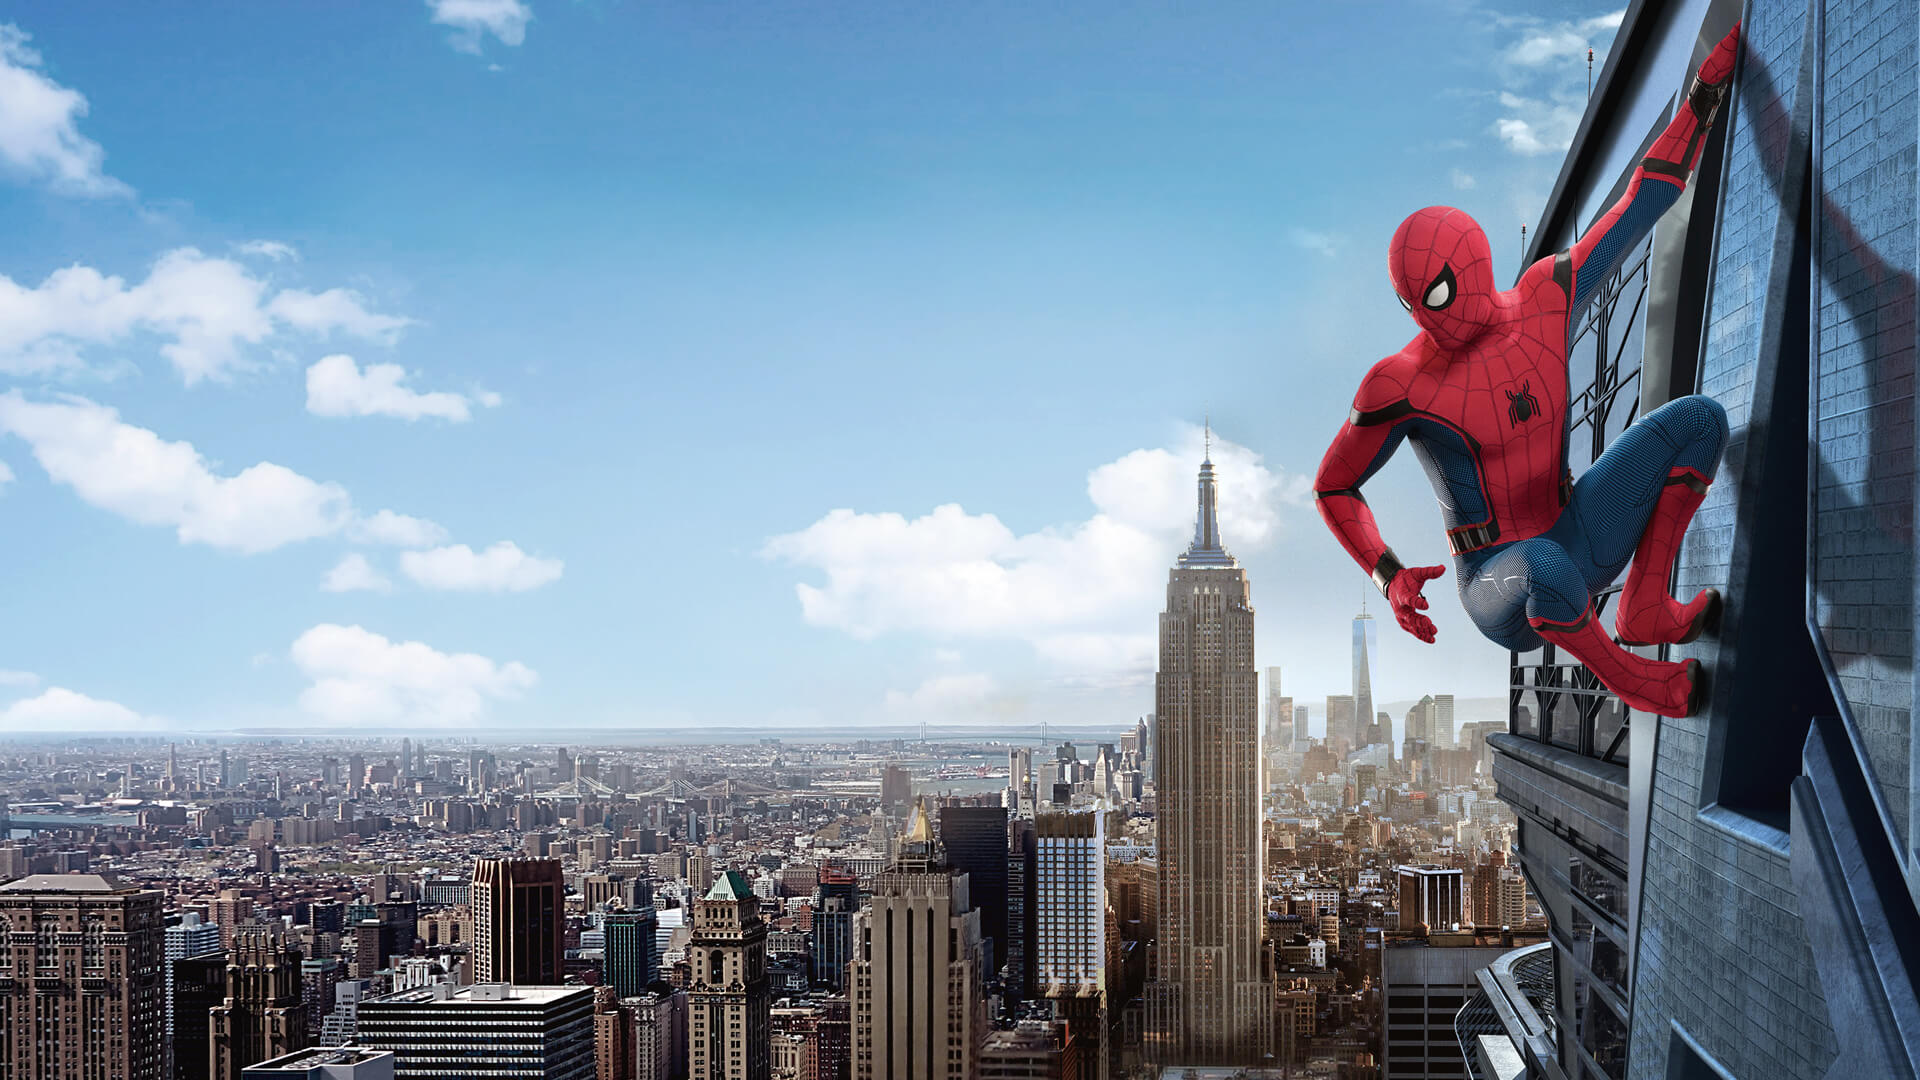 Attachment For Hd Wallpapers 1080p With Superheroes - Spiderman Homecoming - HD Wallpaper 